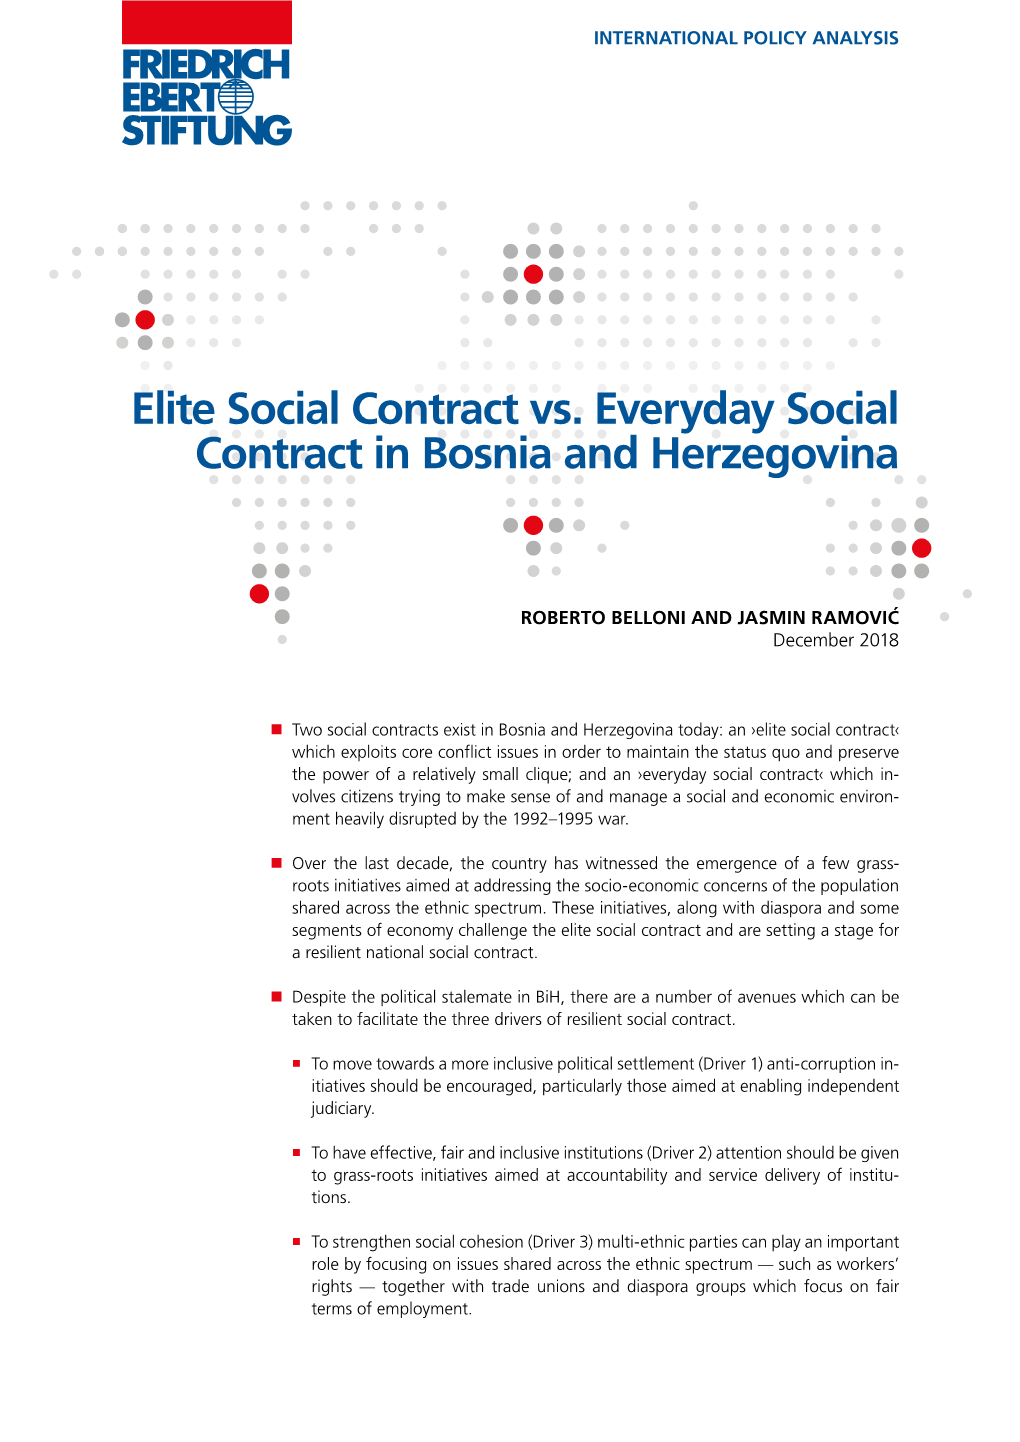 Elite Social Contract Vs. Everyday Social Contract in Bosnia and Herzegovina